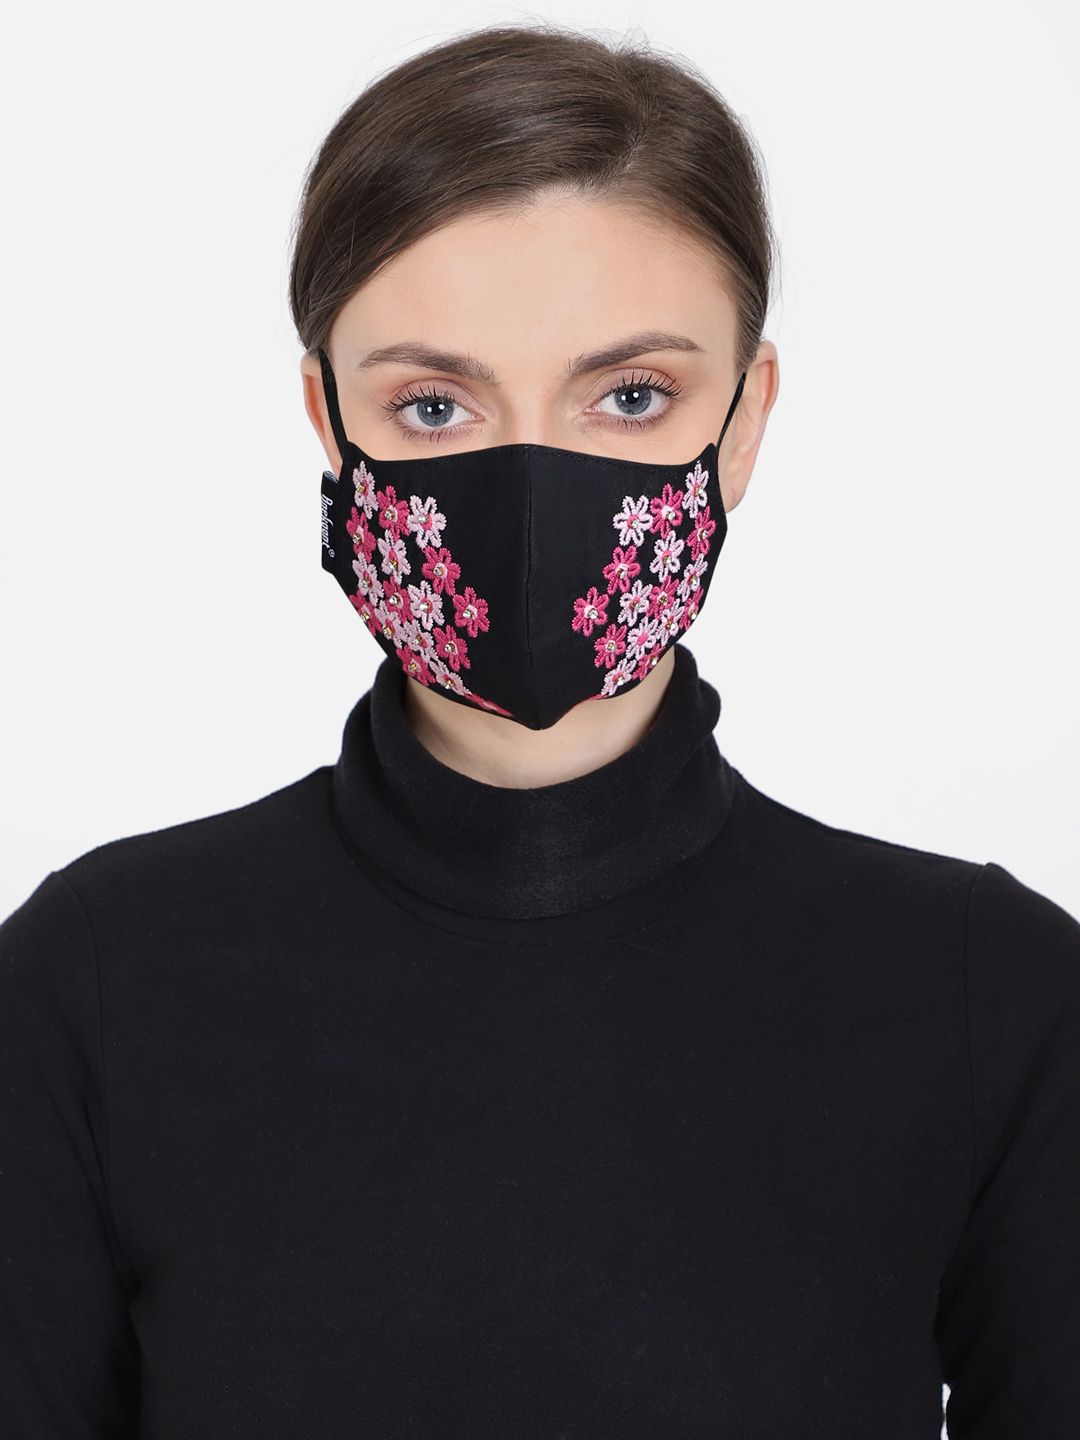 Anekaant Women Black & Pink Floral Embroidered 3-Ply Reusable Cloth Masks Price in India